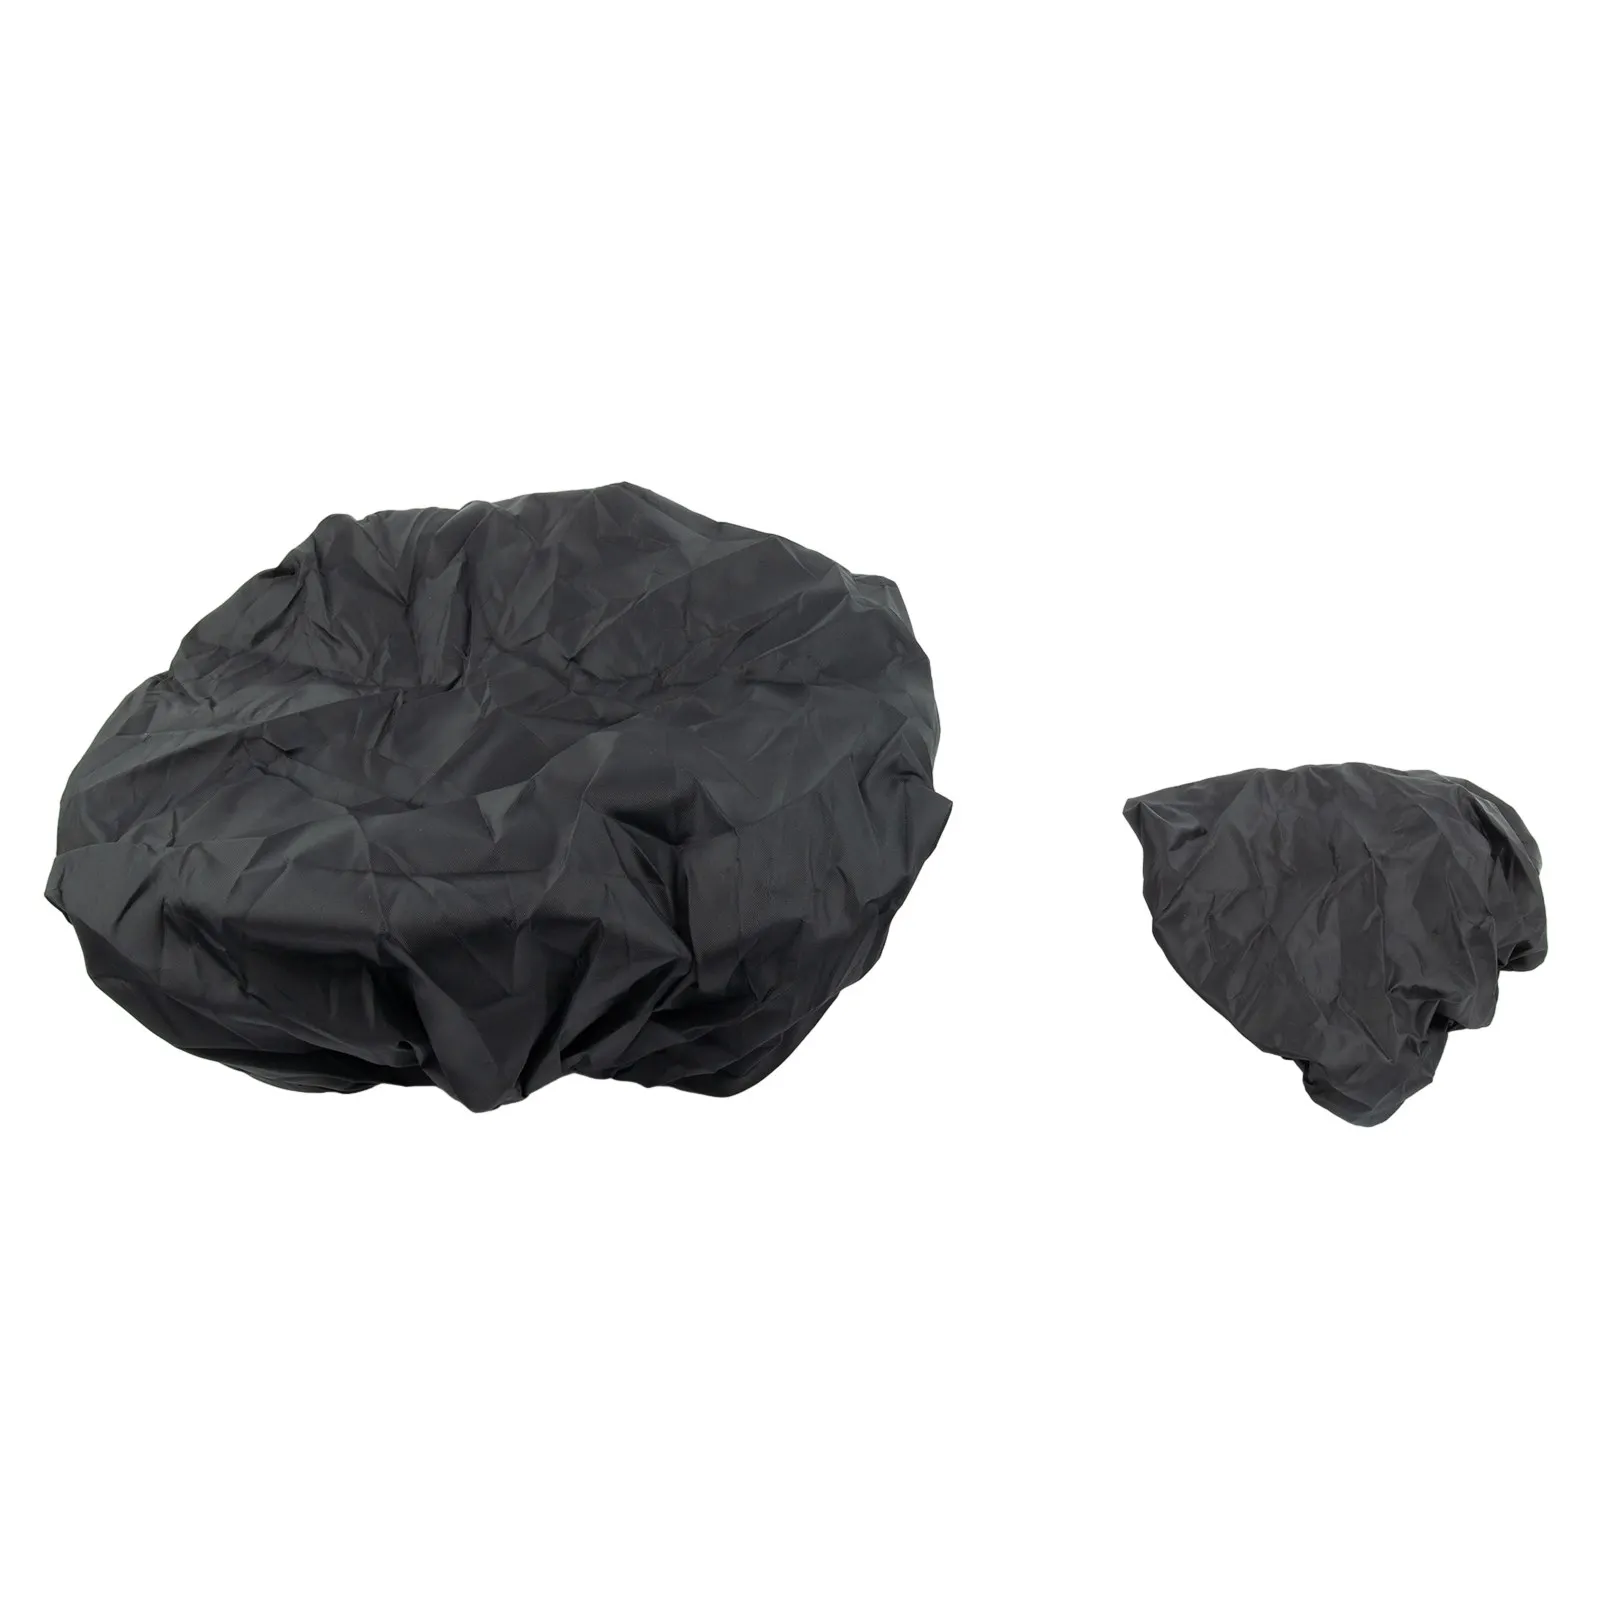 

Durable Bike Cover 200g/set Black I Set Oxford Cloth Protection Tool Rainproof Waterproof For Most Bicycle Baskets